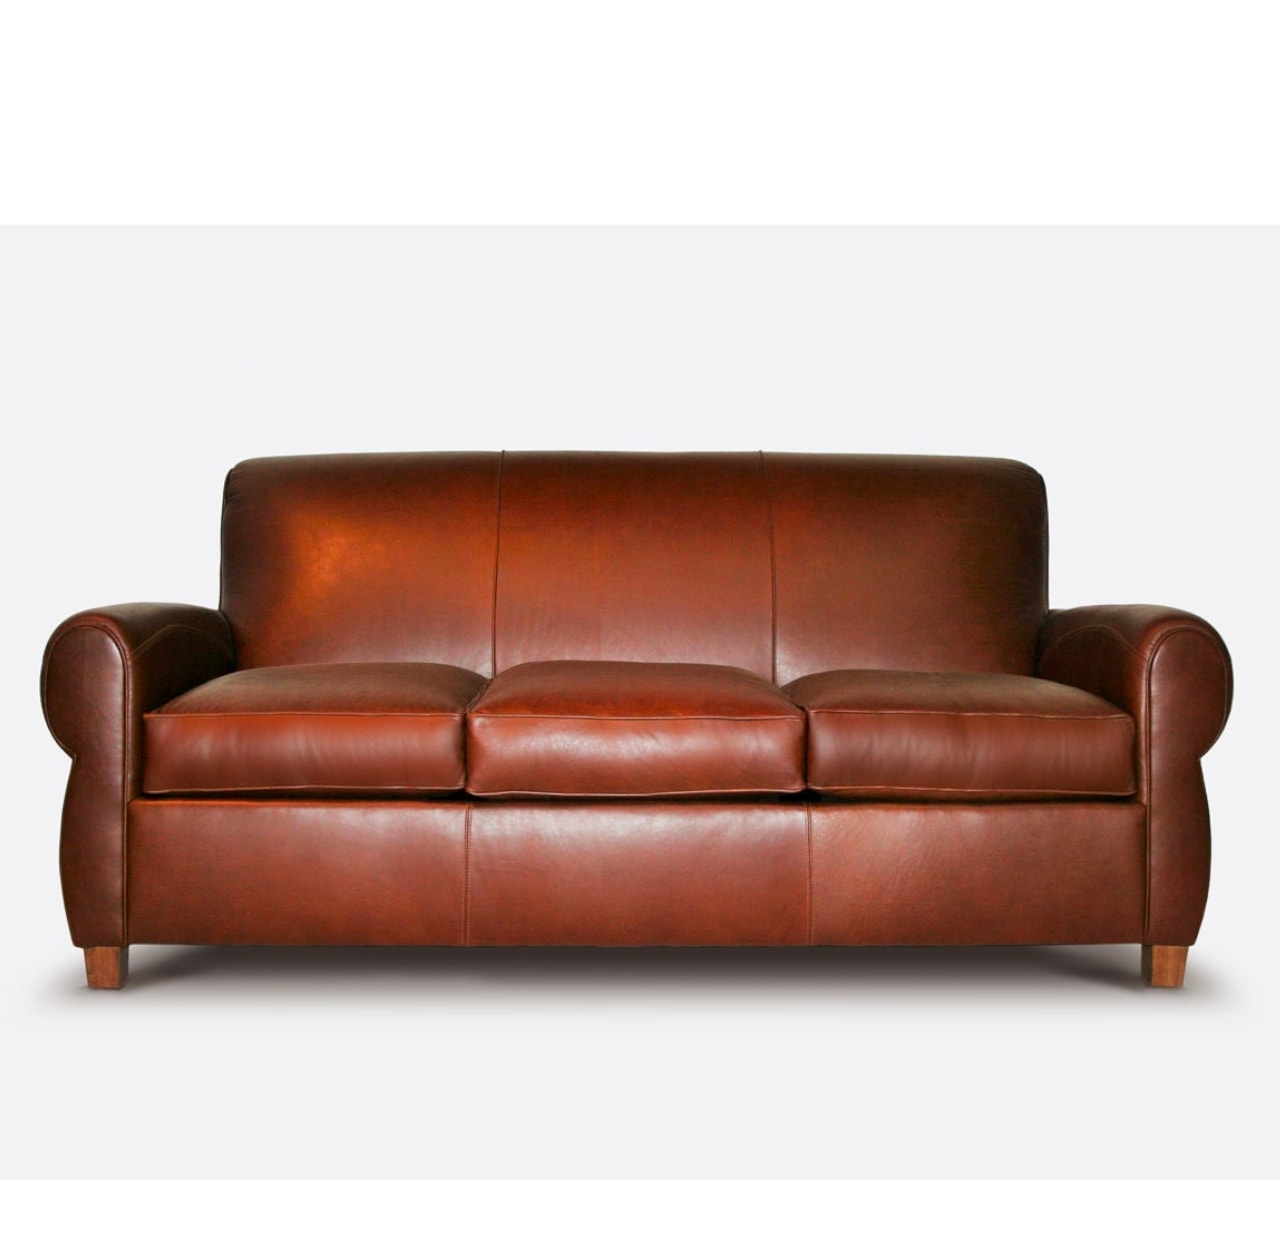 armstrong chestnut brown leather